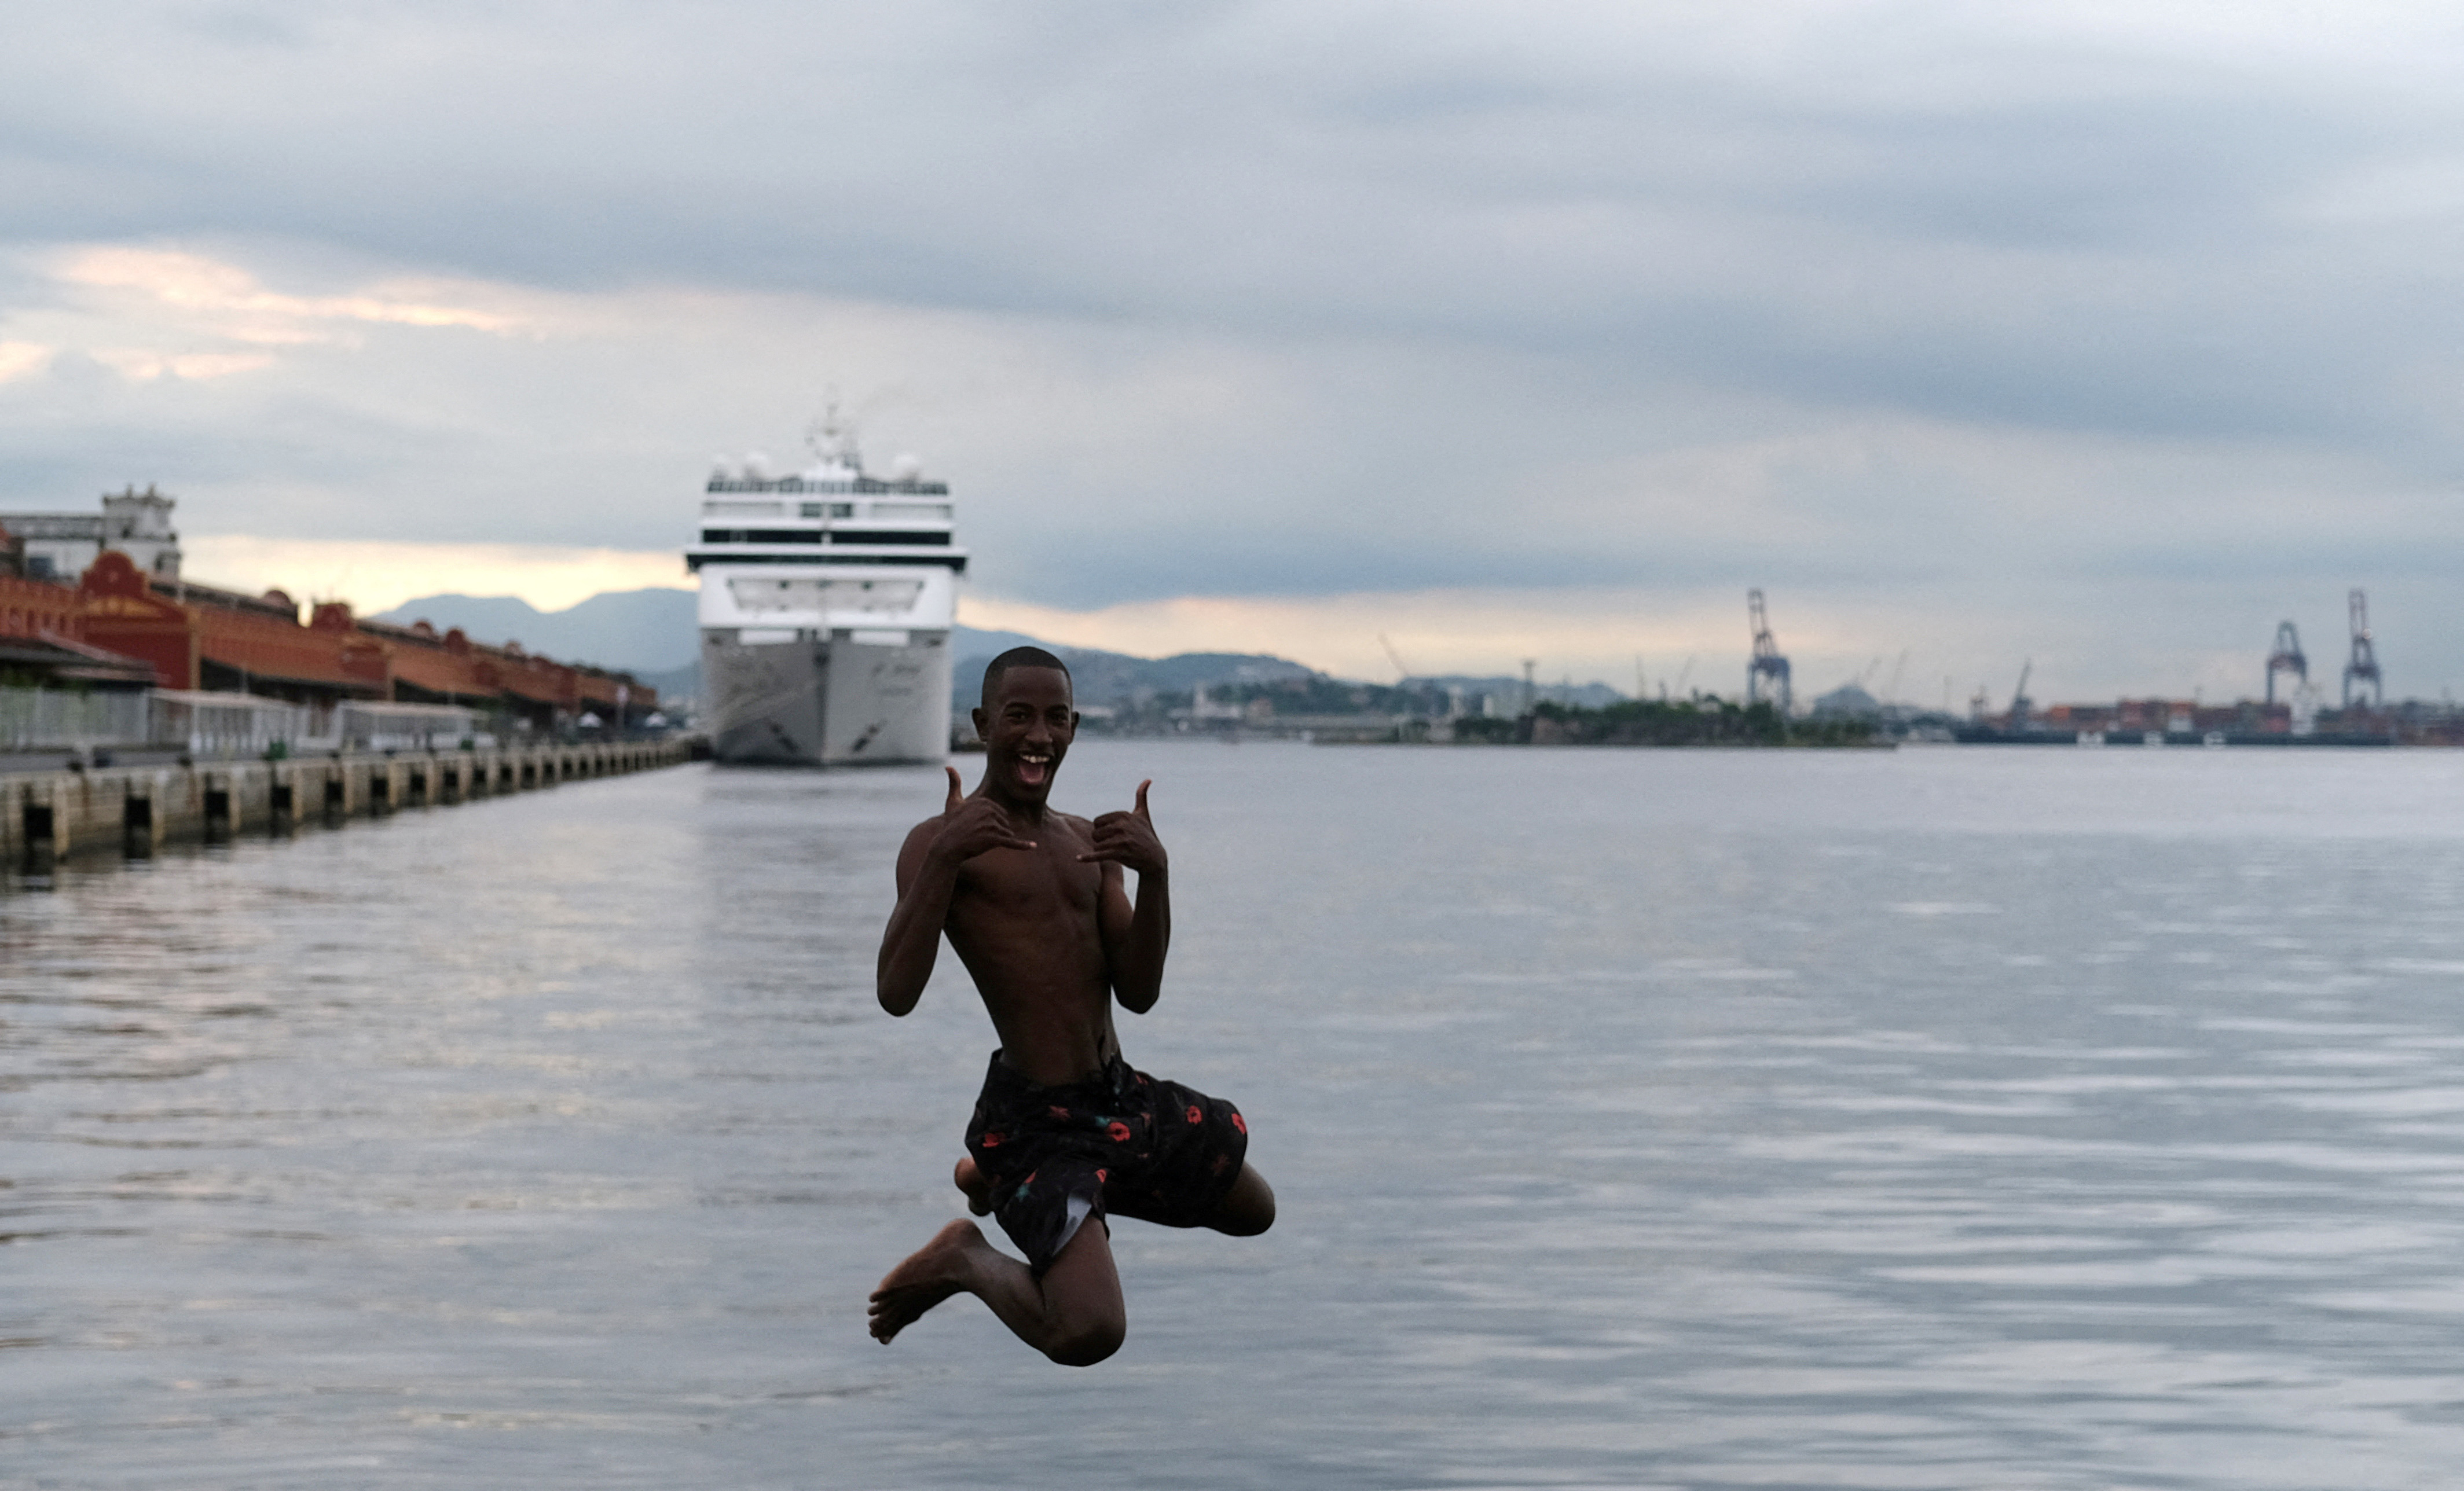 A youth jumps into the waters of Guanabara Bay, next to a cruise ship docked at Rio de Janeiro port